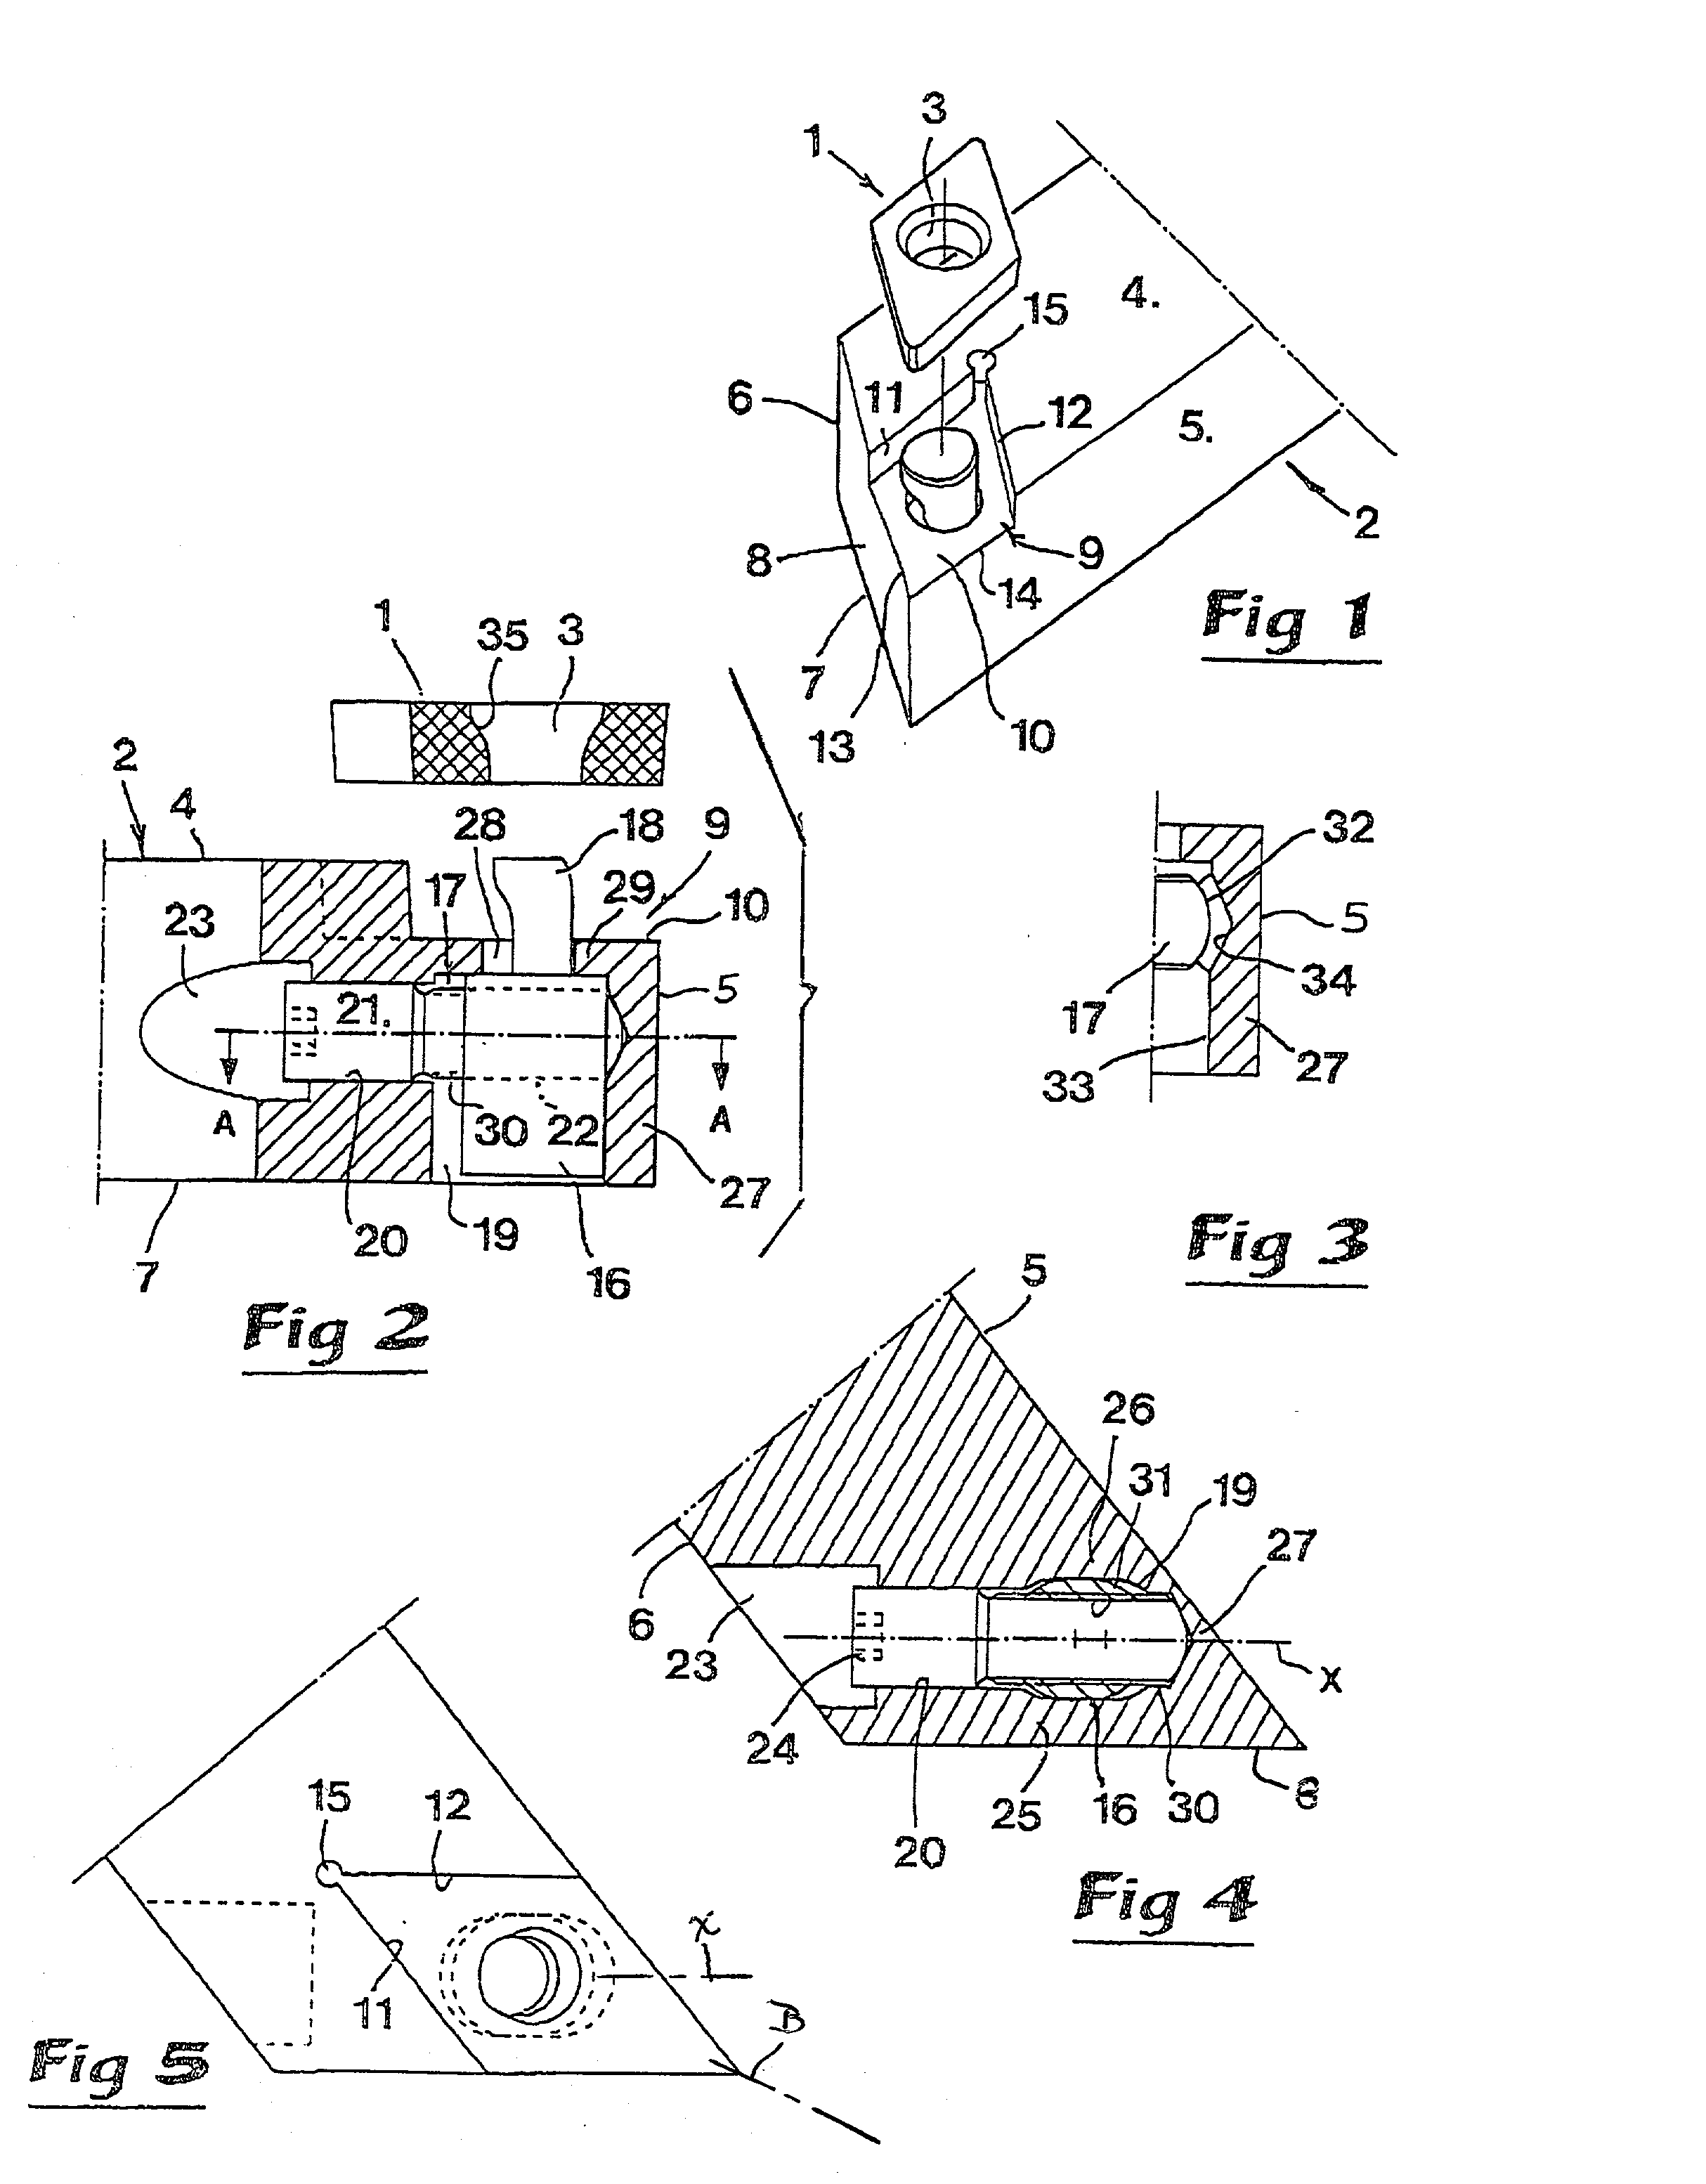 Tool for chip removing machining having a screw-actuated clamp